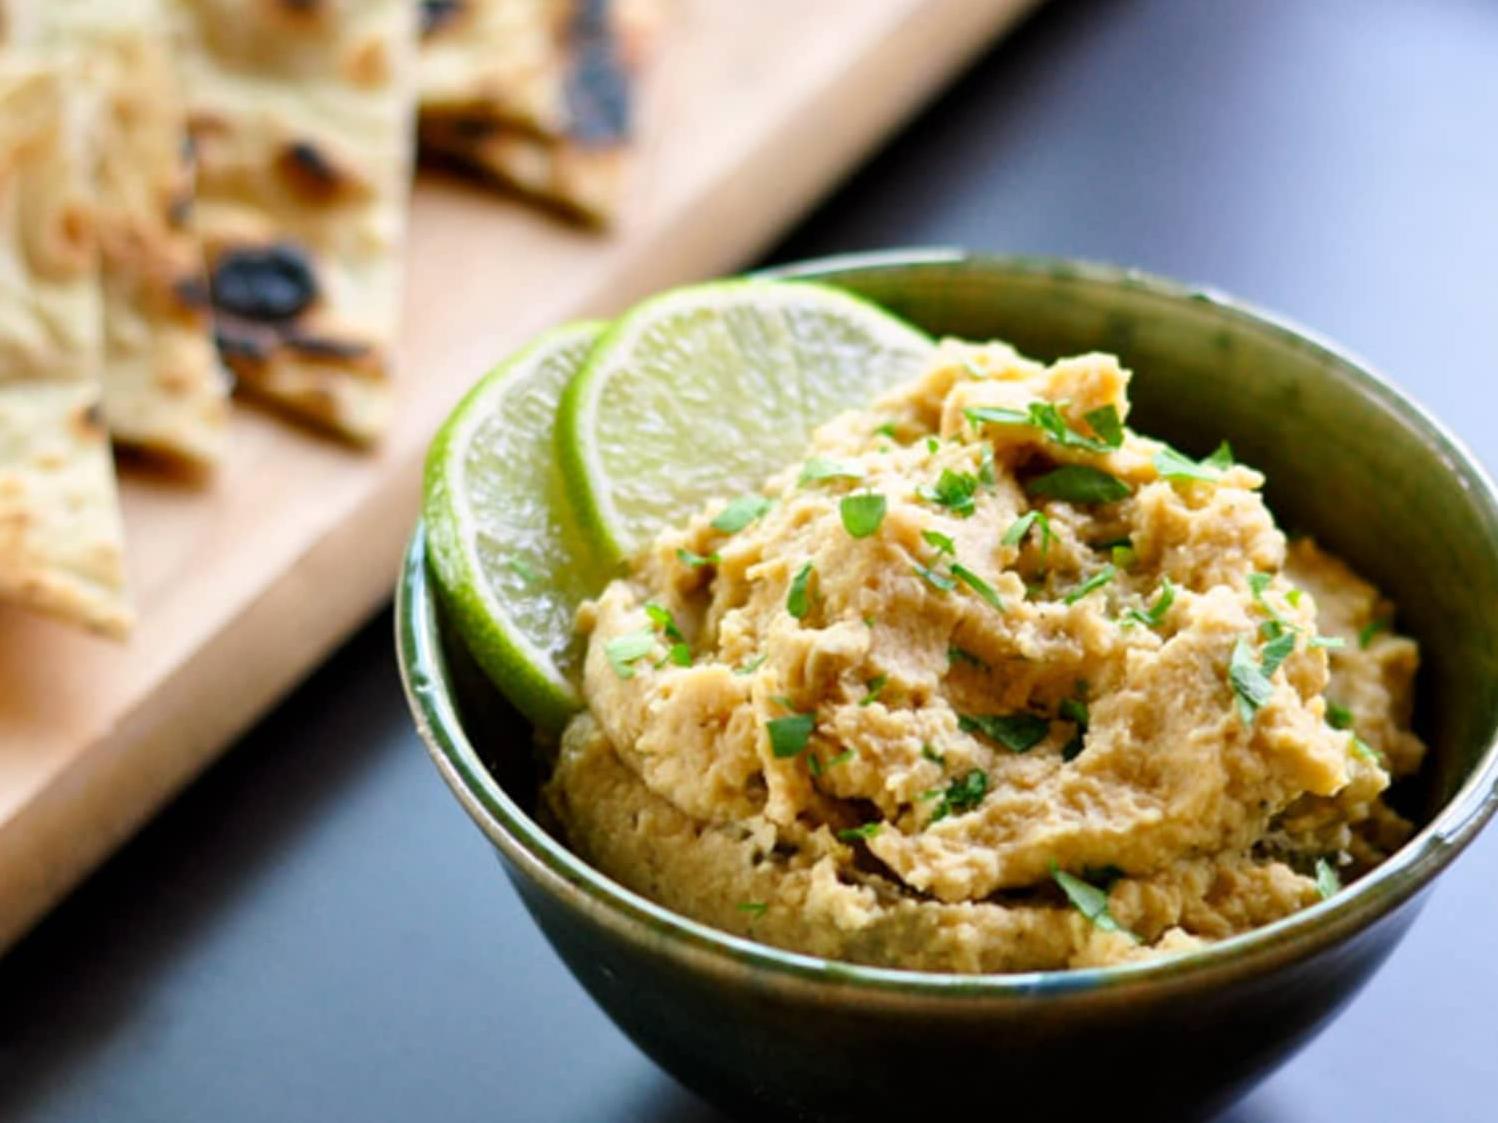  Get your healthy dose of protein and spice with this jalapeno and lime hummus.